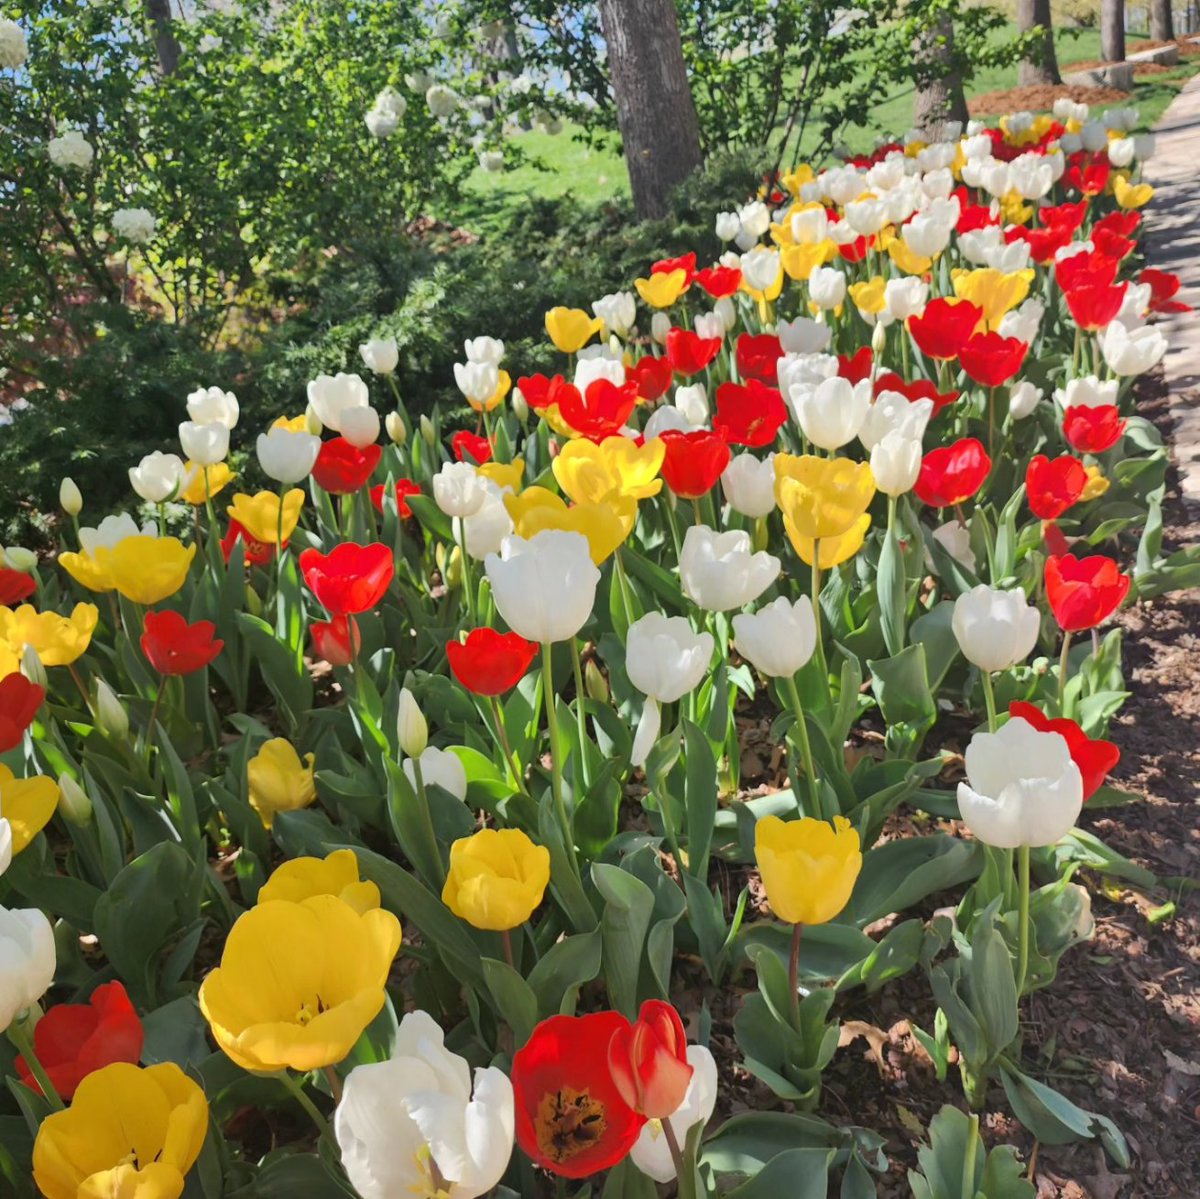 🔴🟡⚪️🌷I don't know ... There are so many great color combinations of tulips this year, but I have to say this mix of red, yellow, and white is STUNNING! #myriadblooms #tulips #tulipfestokc